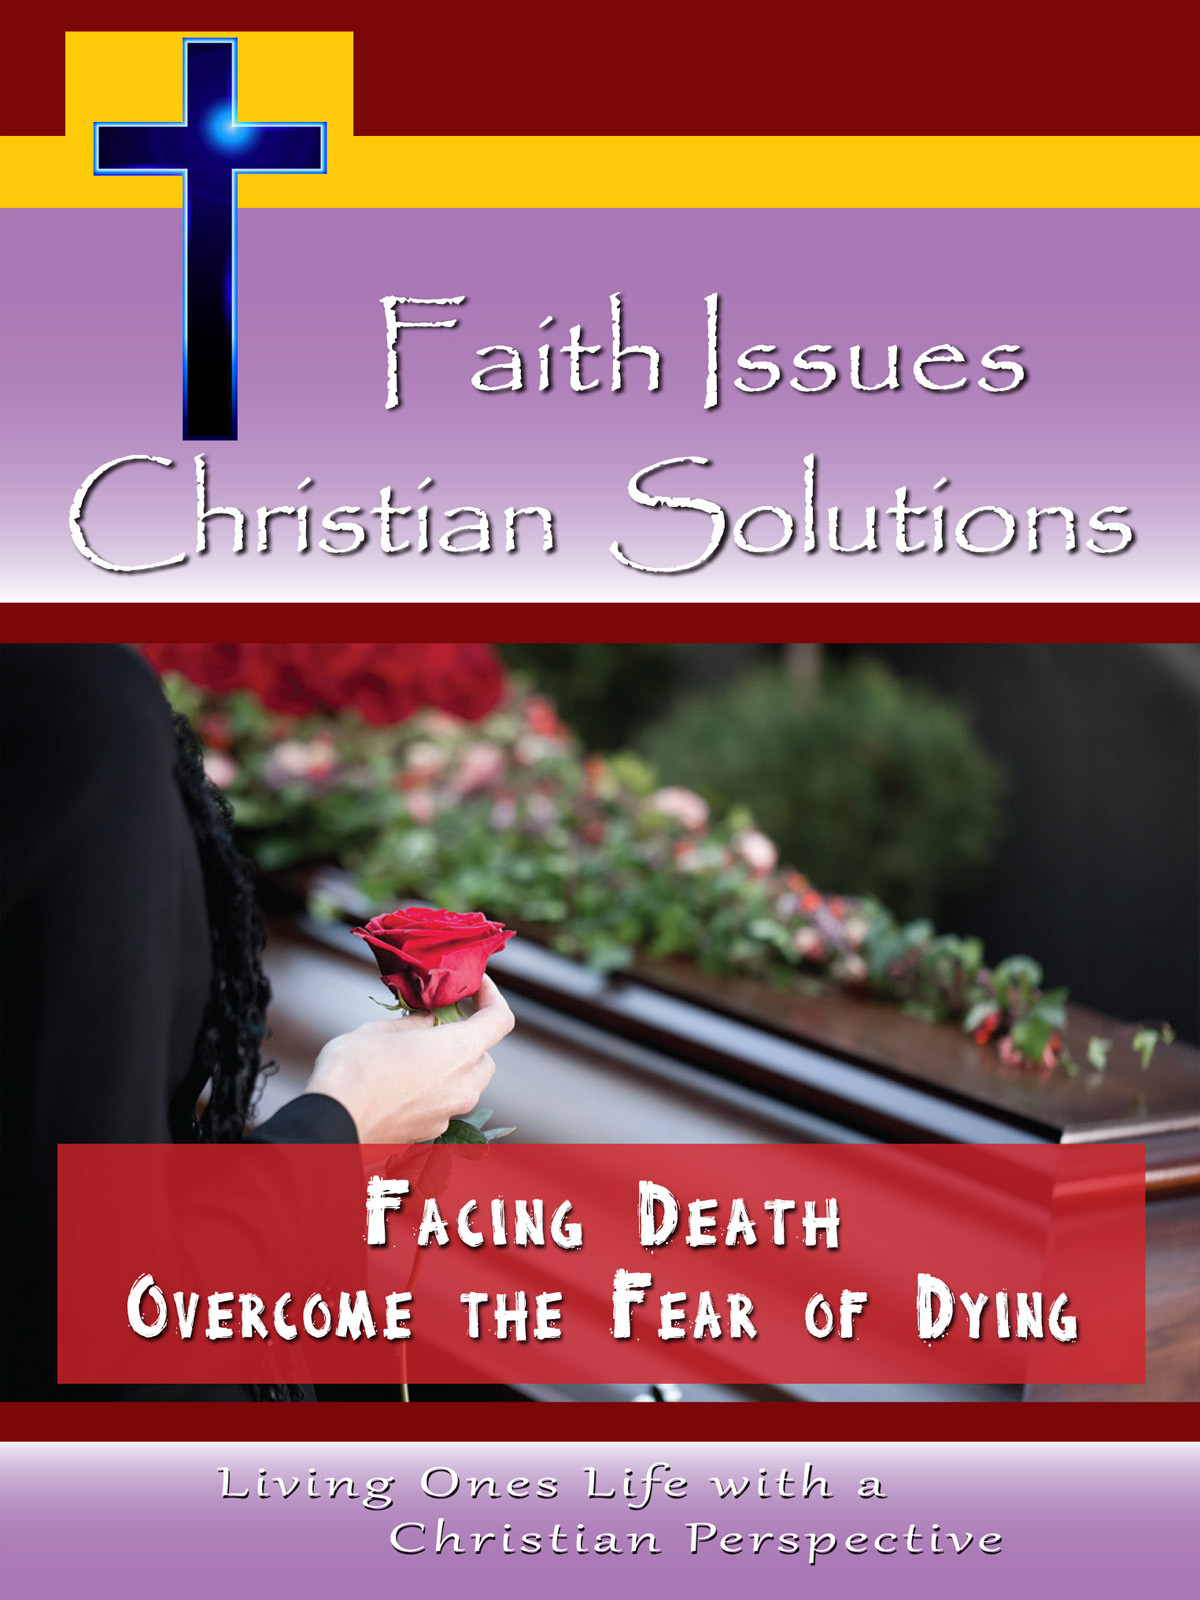 CH10026 - Facing Death Overcome the Fear of Dying